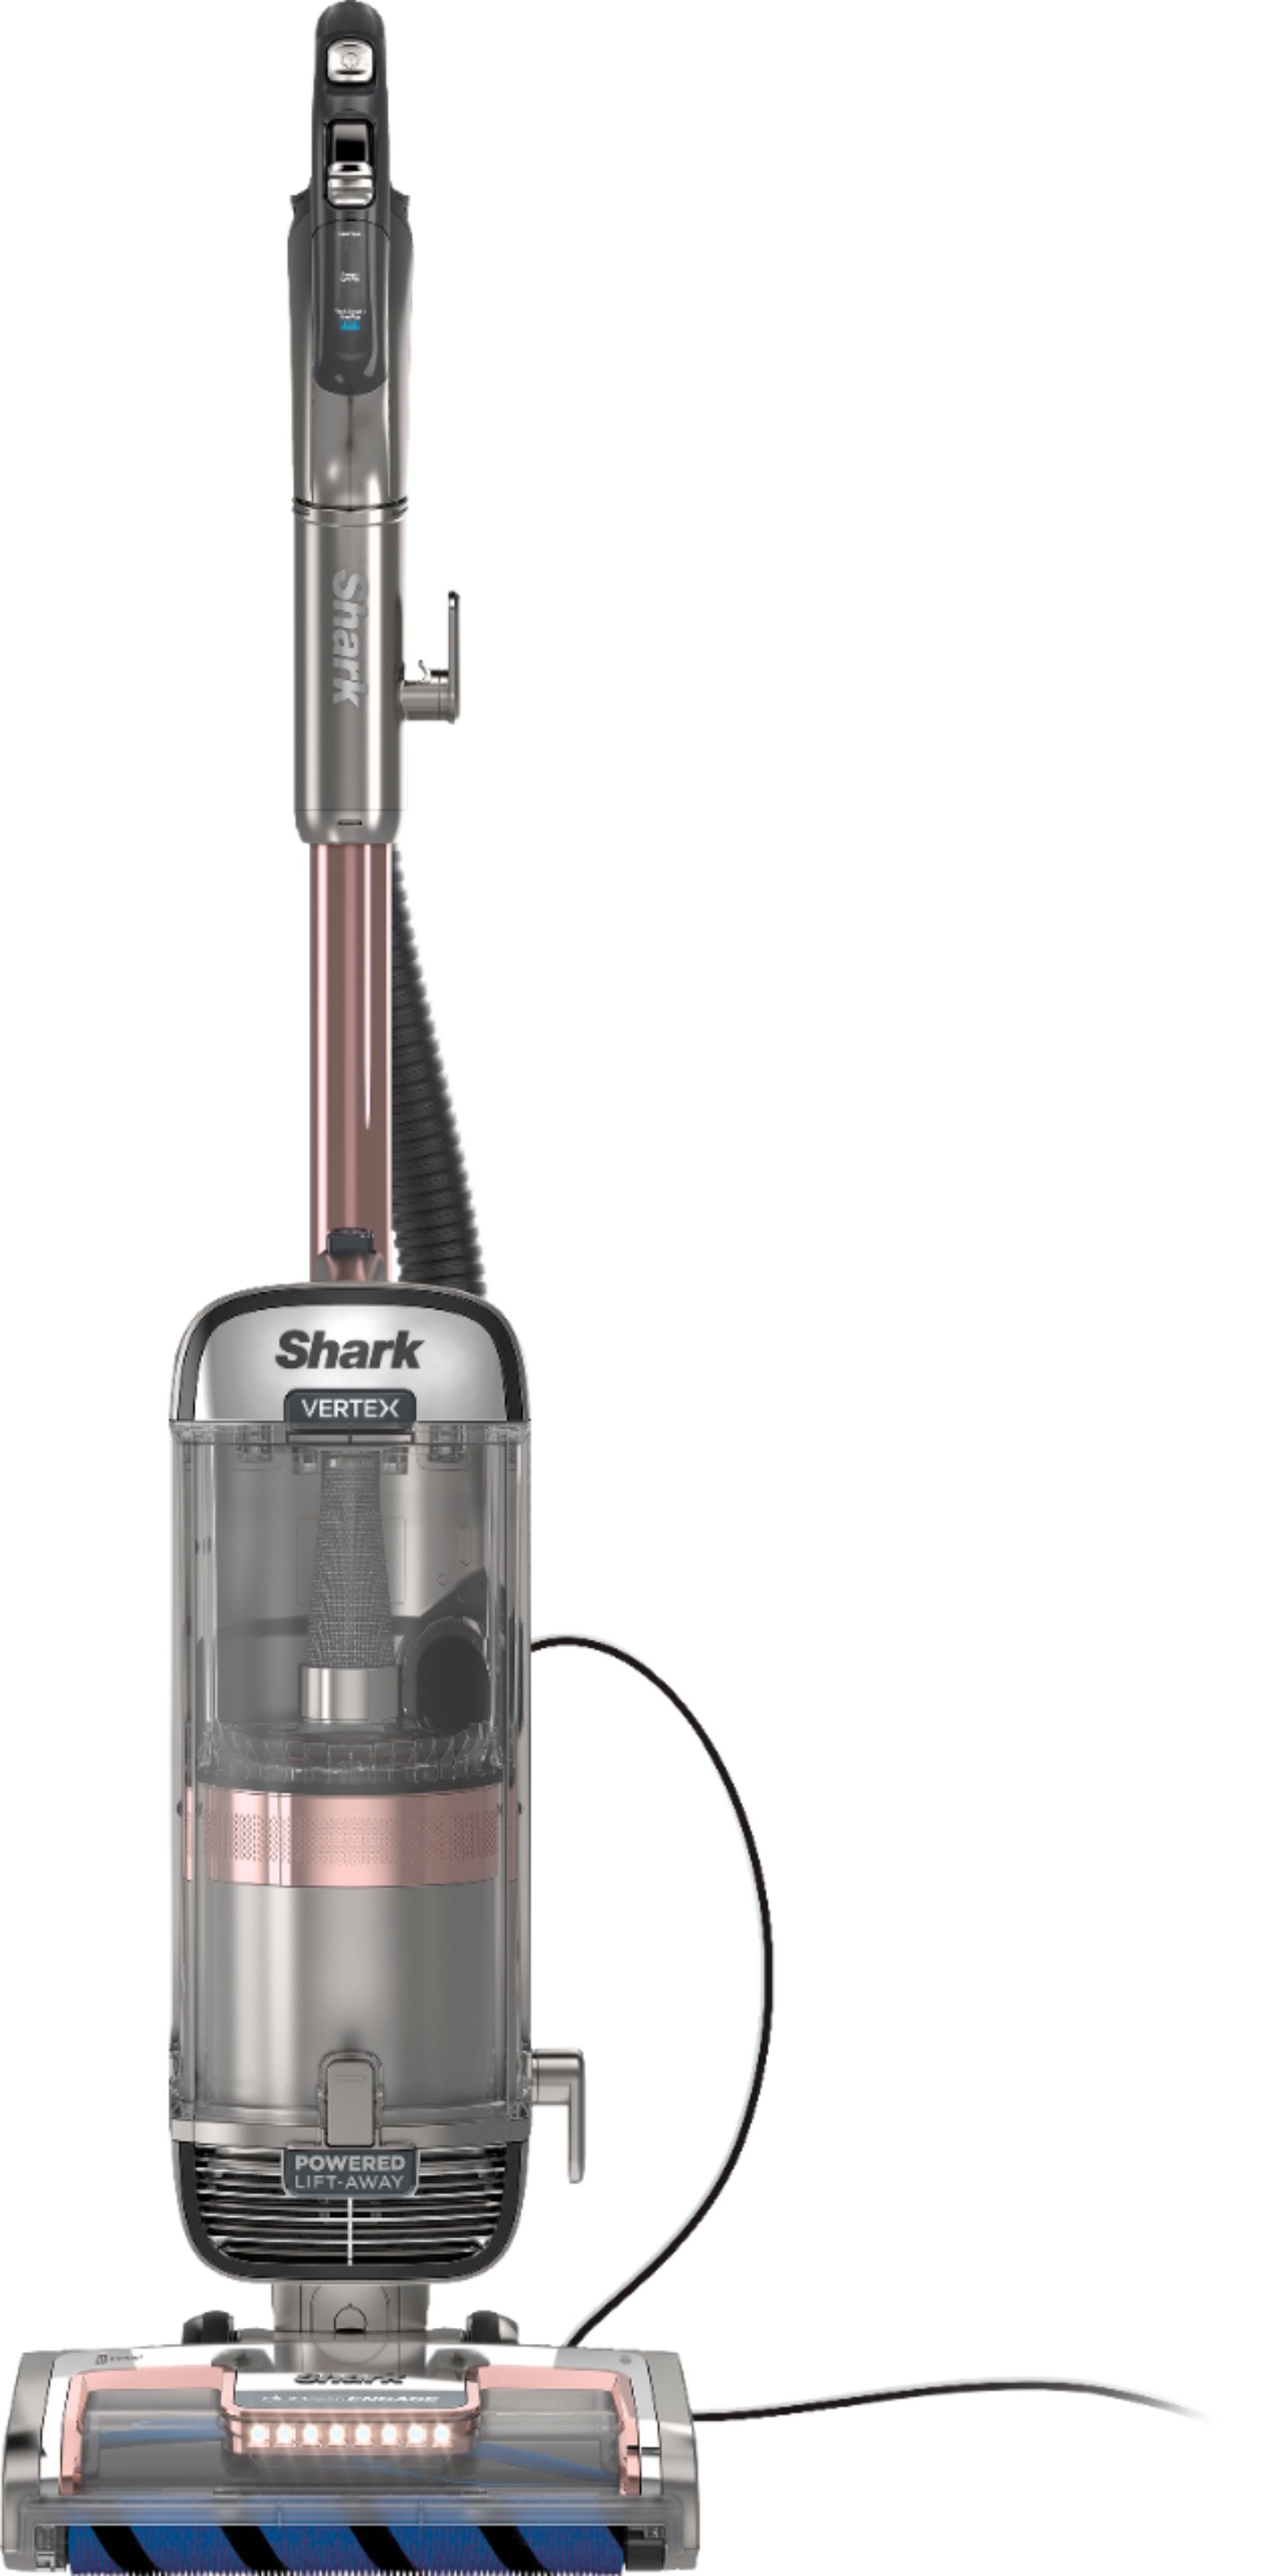 Shark - Vertex DuoClean PowerFin Upright Vacuum with Powered Lift-Away and Self-Cleaning Brushroll - Rose Gold